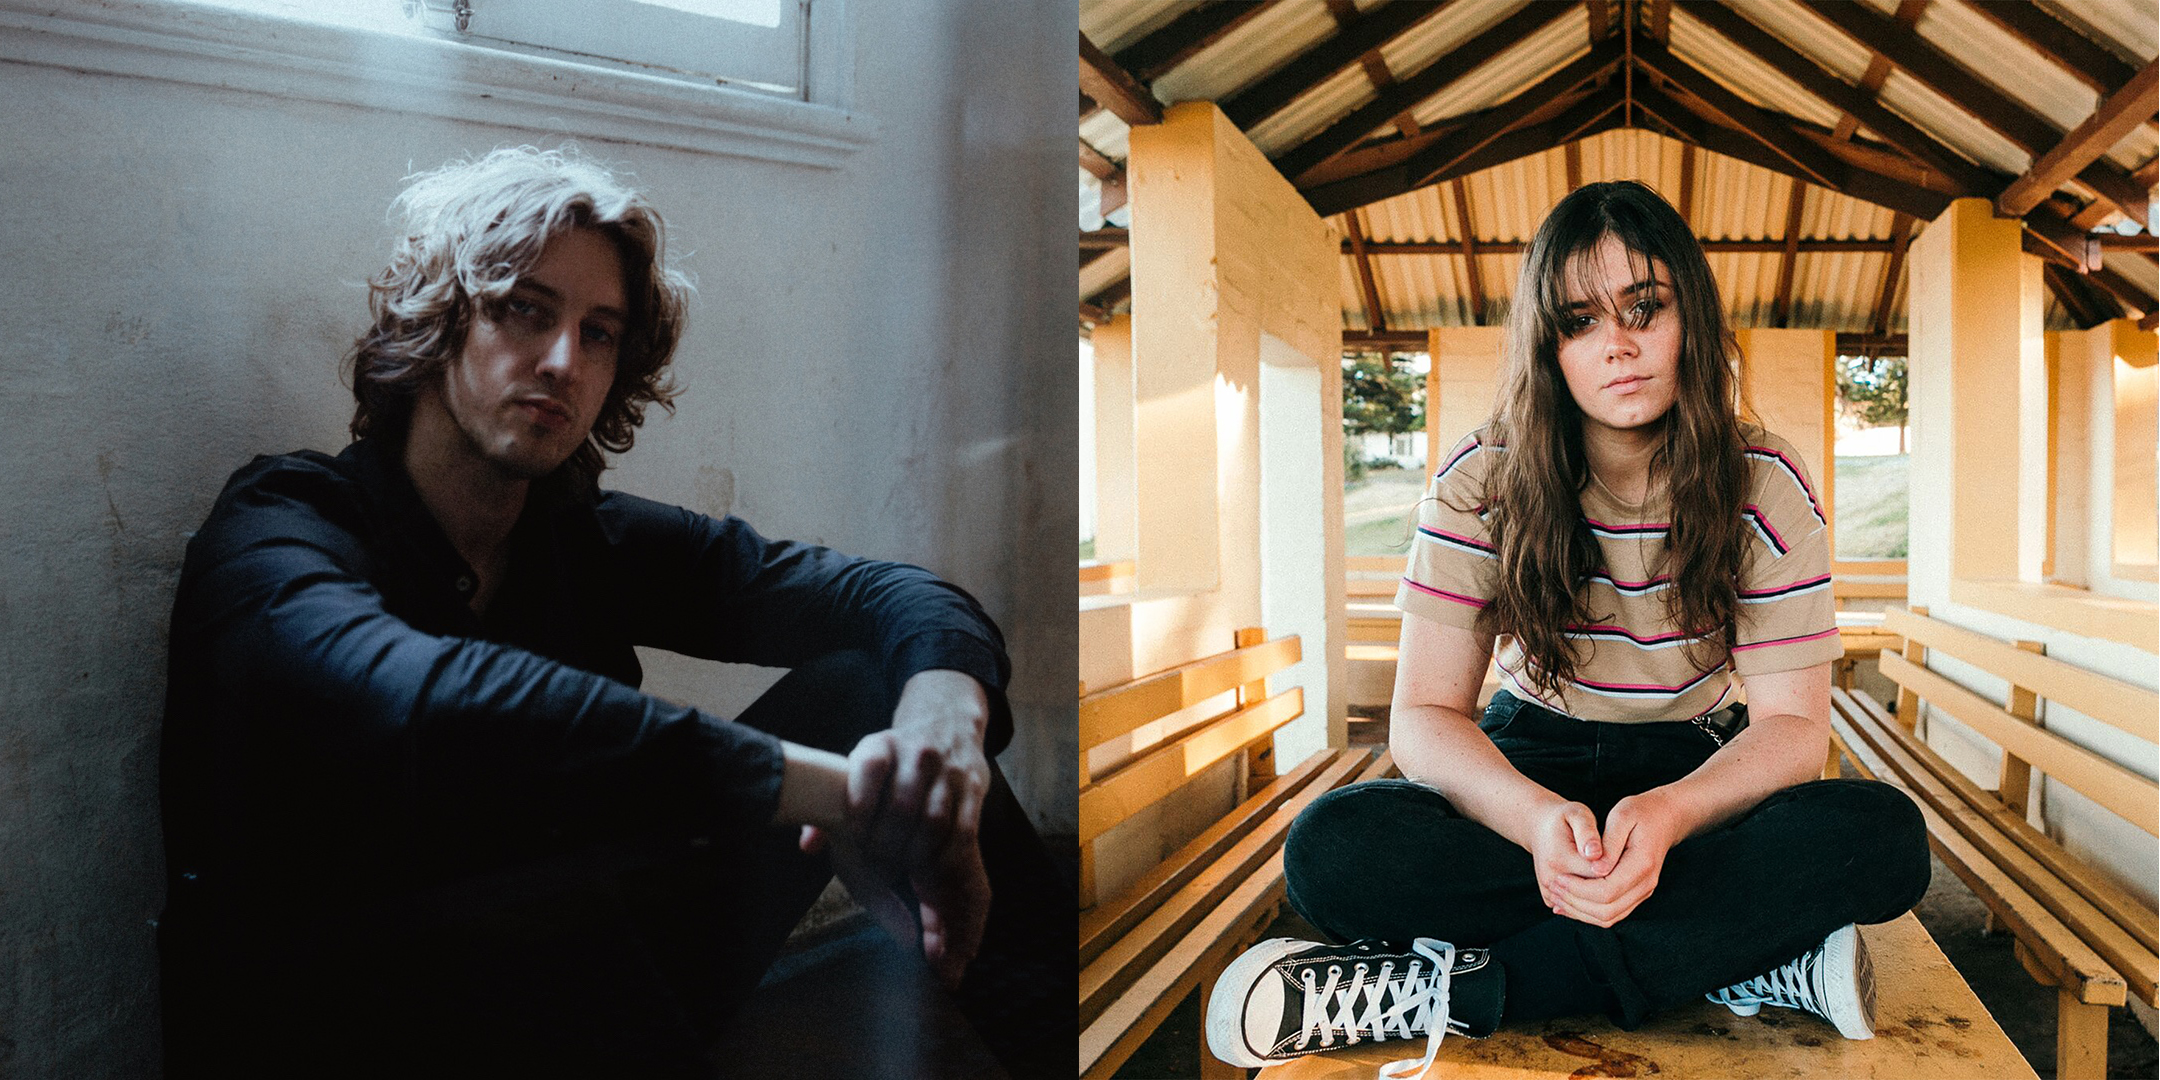 Gang of Youths, Ruby Fields, Stella Donnelly, Dean Lewis among 19 Australian acts announced for SXSW 2018